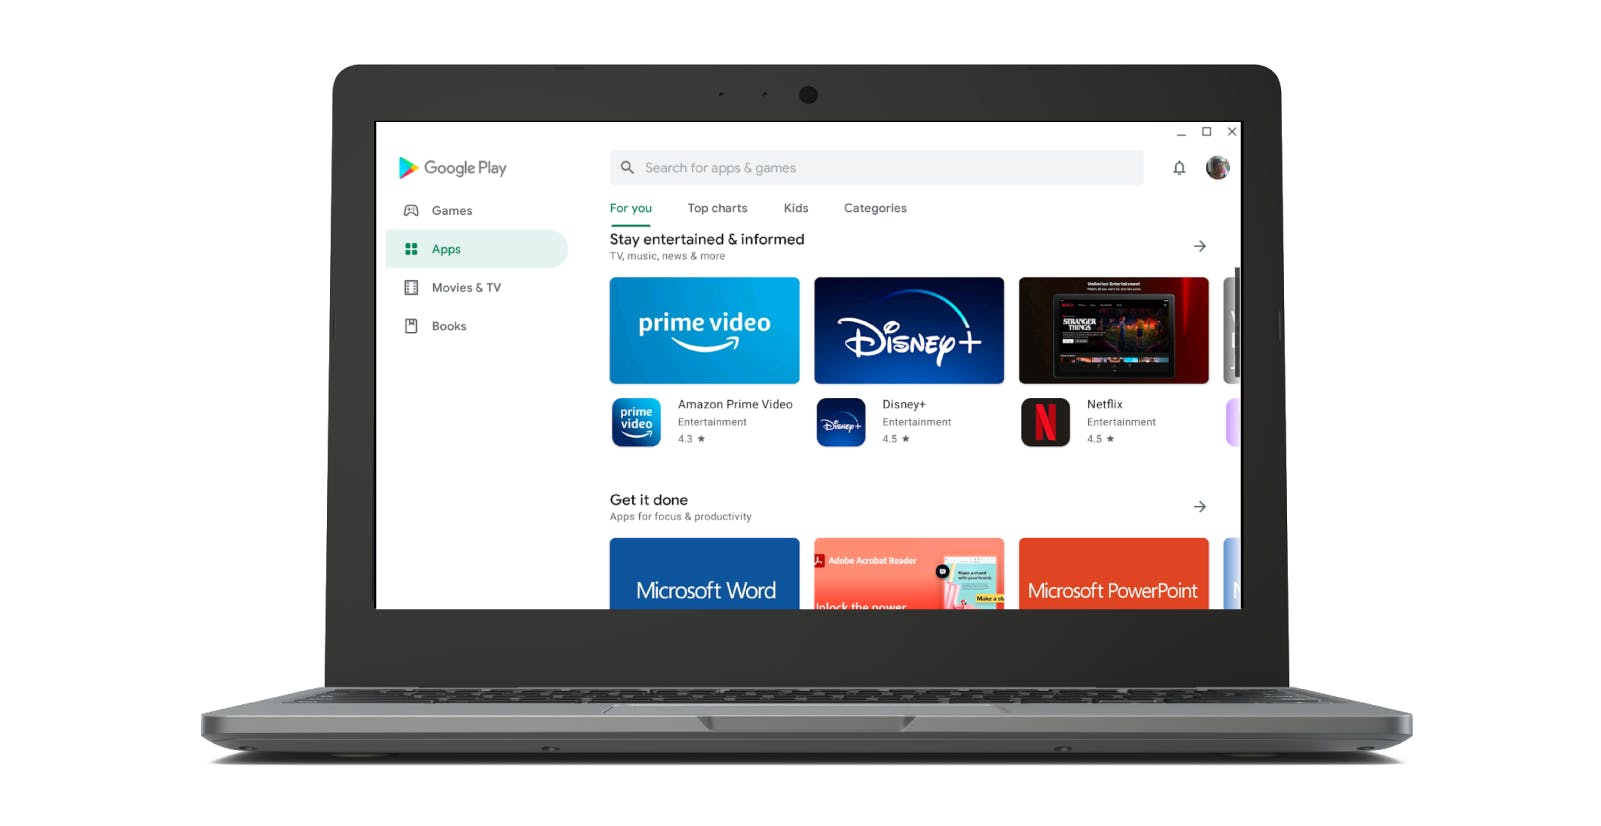 Content-forward listings in Google Play that spotlight the best Chromebook-optimized apps.